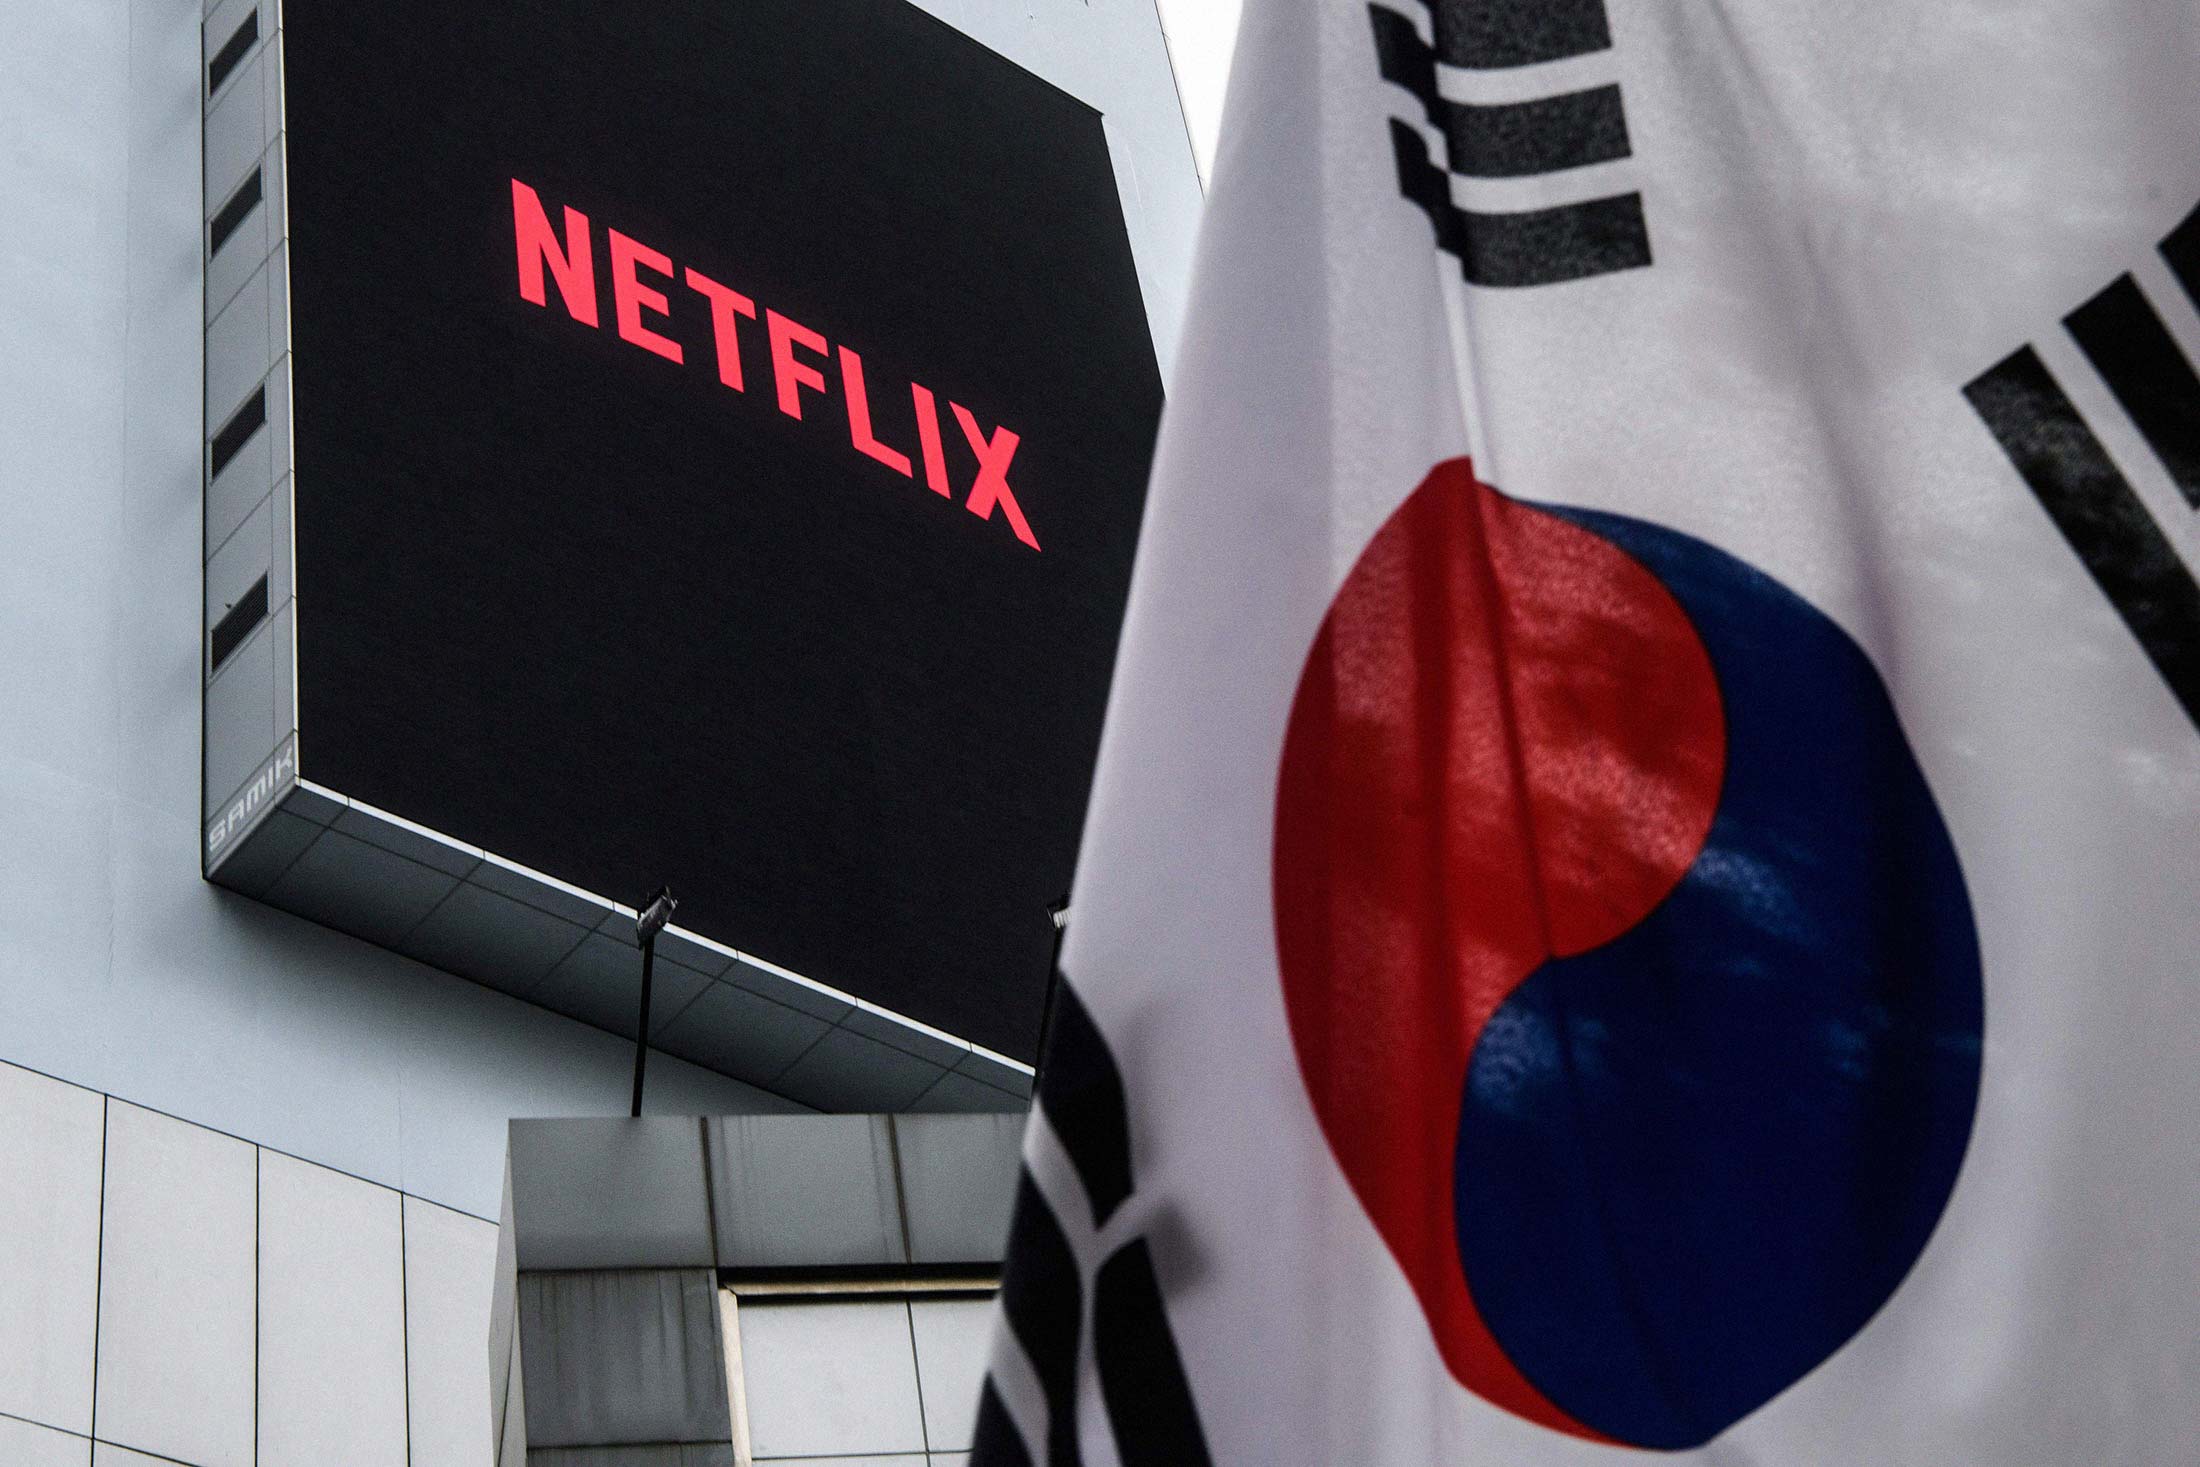 The logo of Netflix, producer of the hit series Squid Game, beyond a South Korean flag&nbsp;in Seoul.